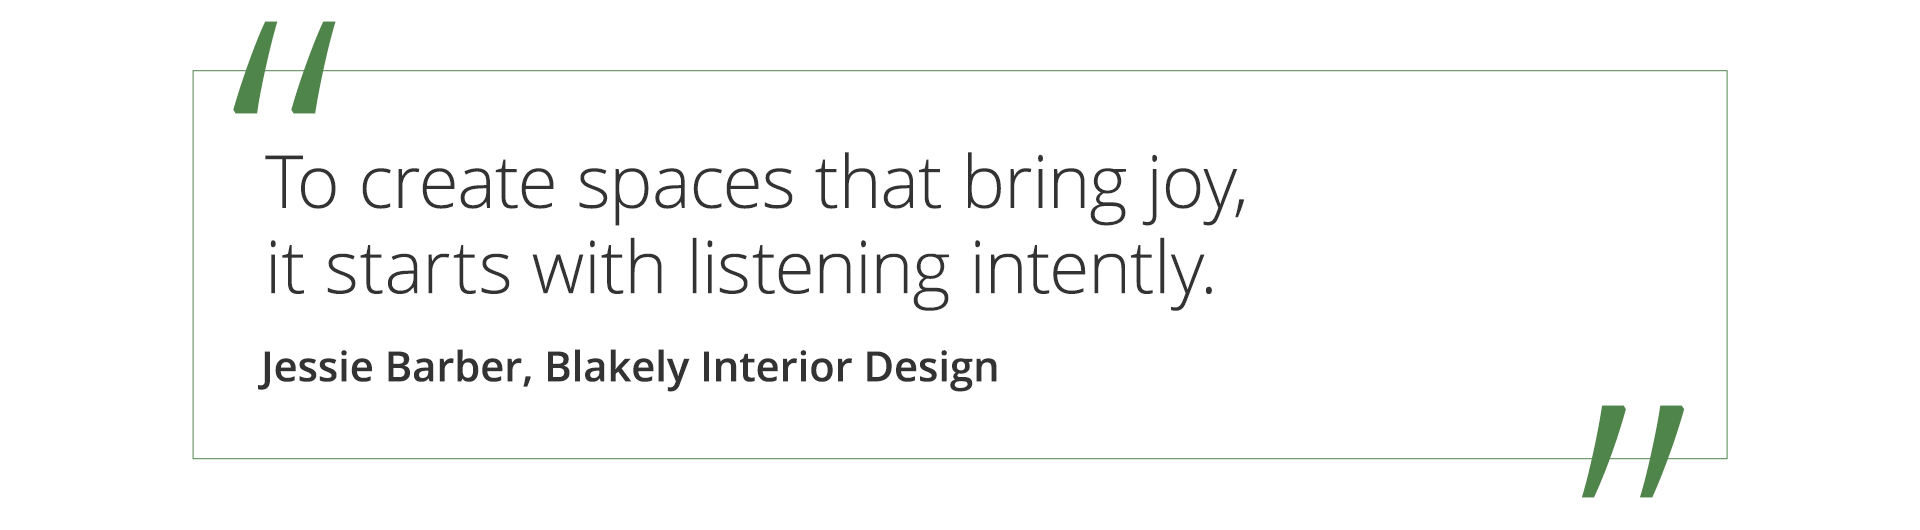 Graphic featuring the quote “To create spaces that bring joy, it starts with listening intently.” by Jessie Barber of Blakely Interior Design.